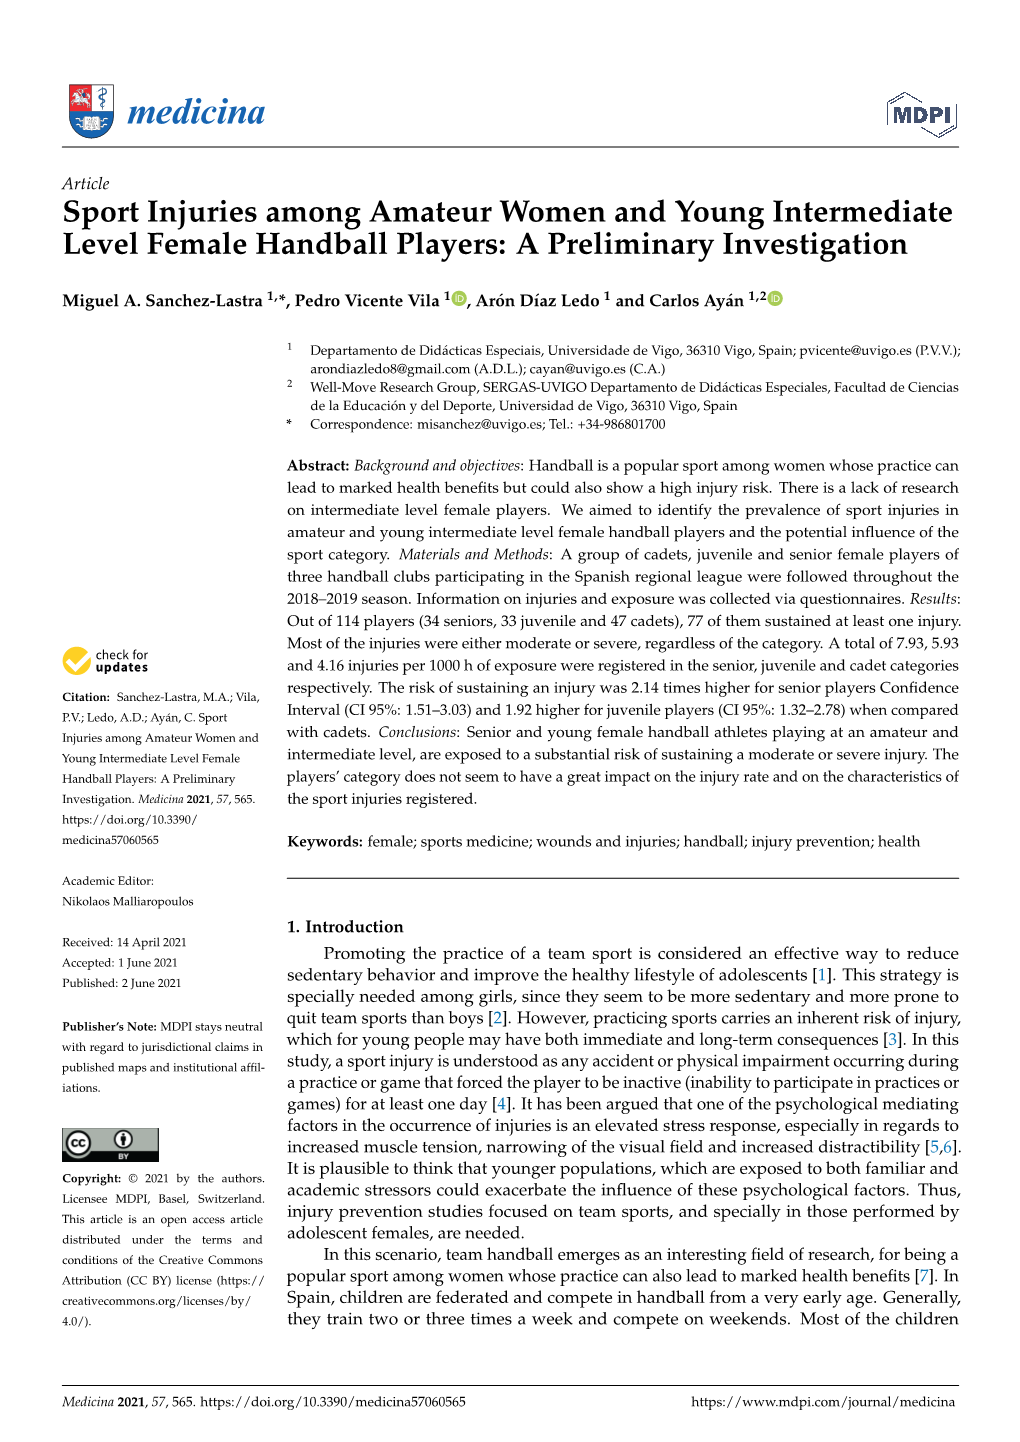 Sport Injuries Among Amateur Women and Young Intermediate Level Female Handball Players: a Preliminary Investigation